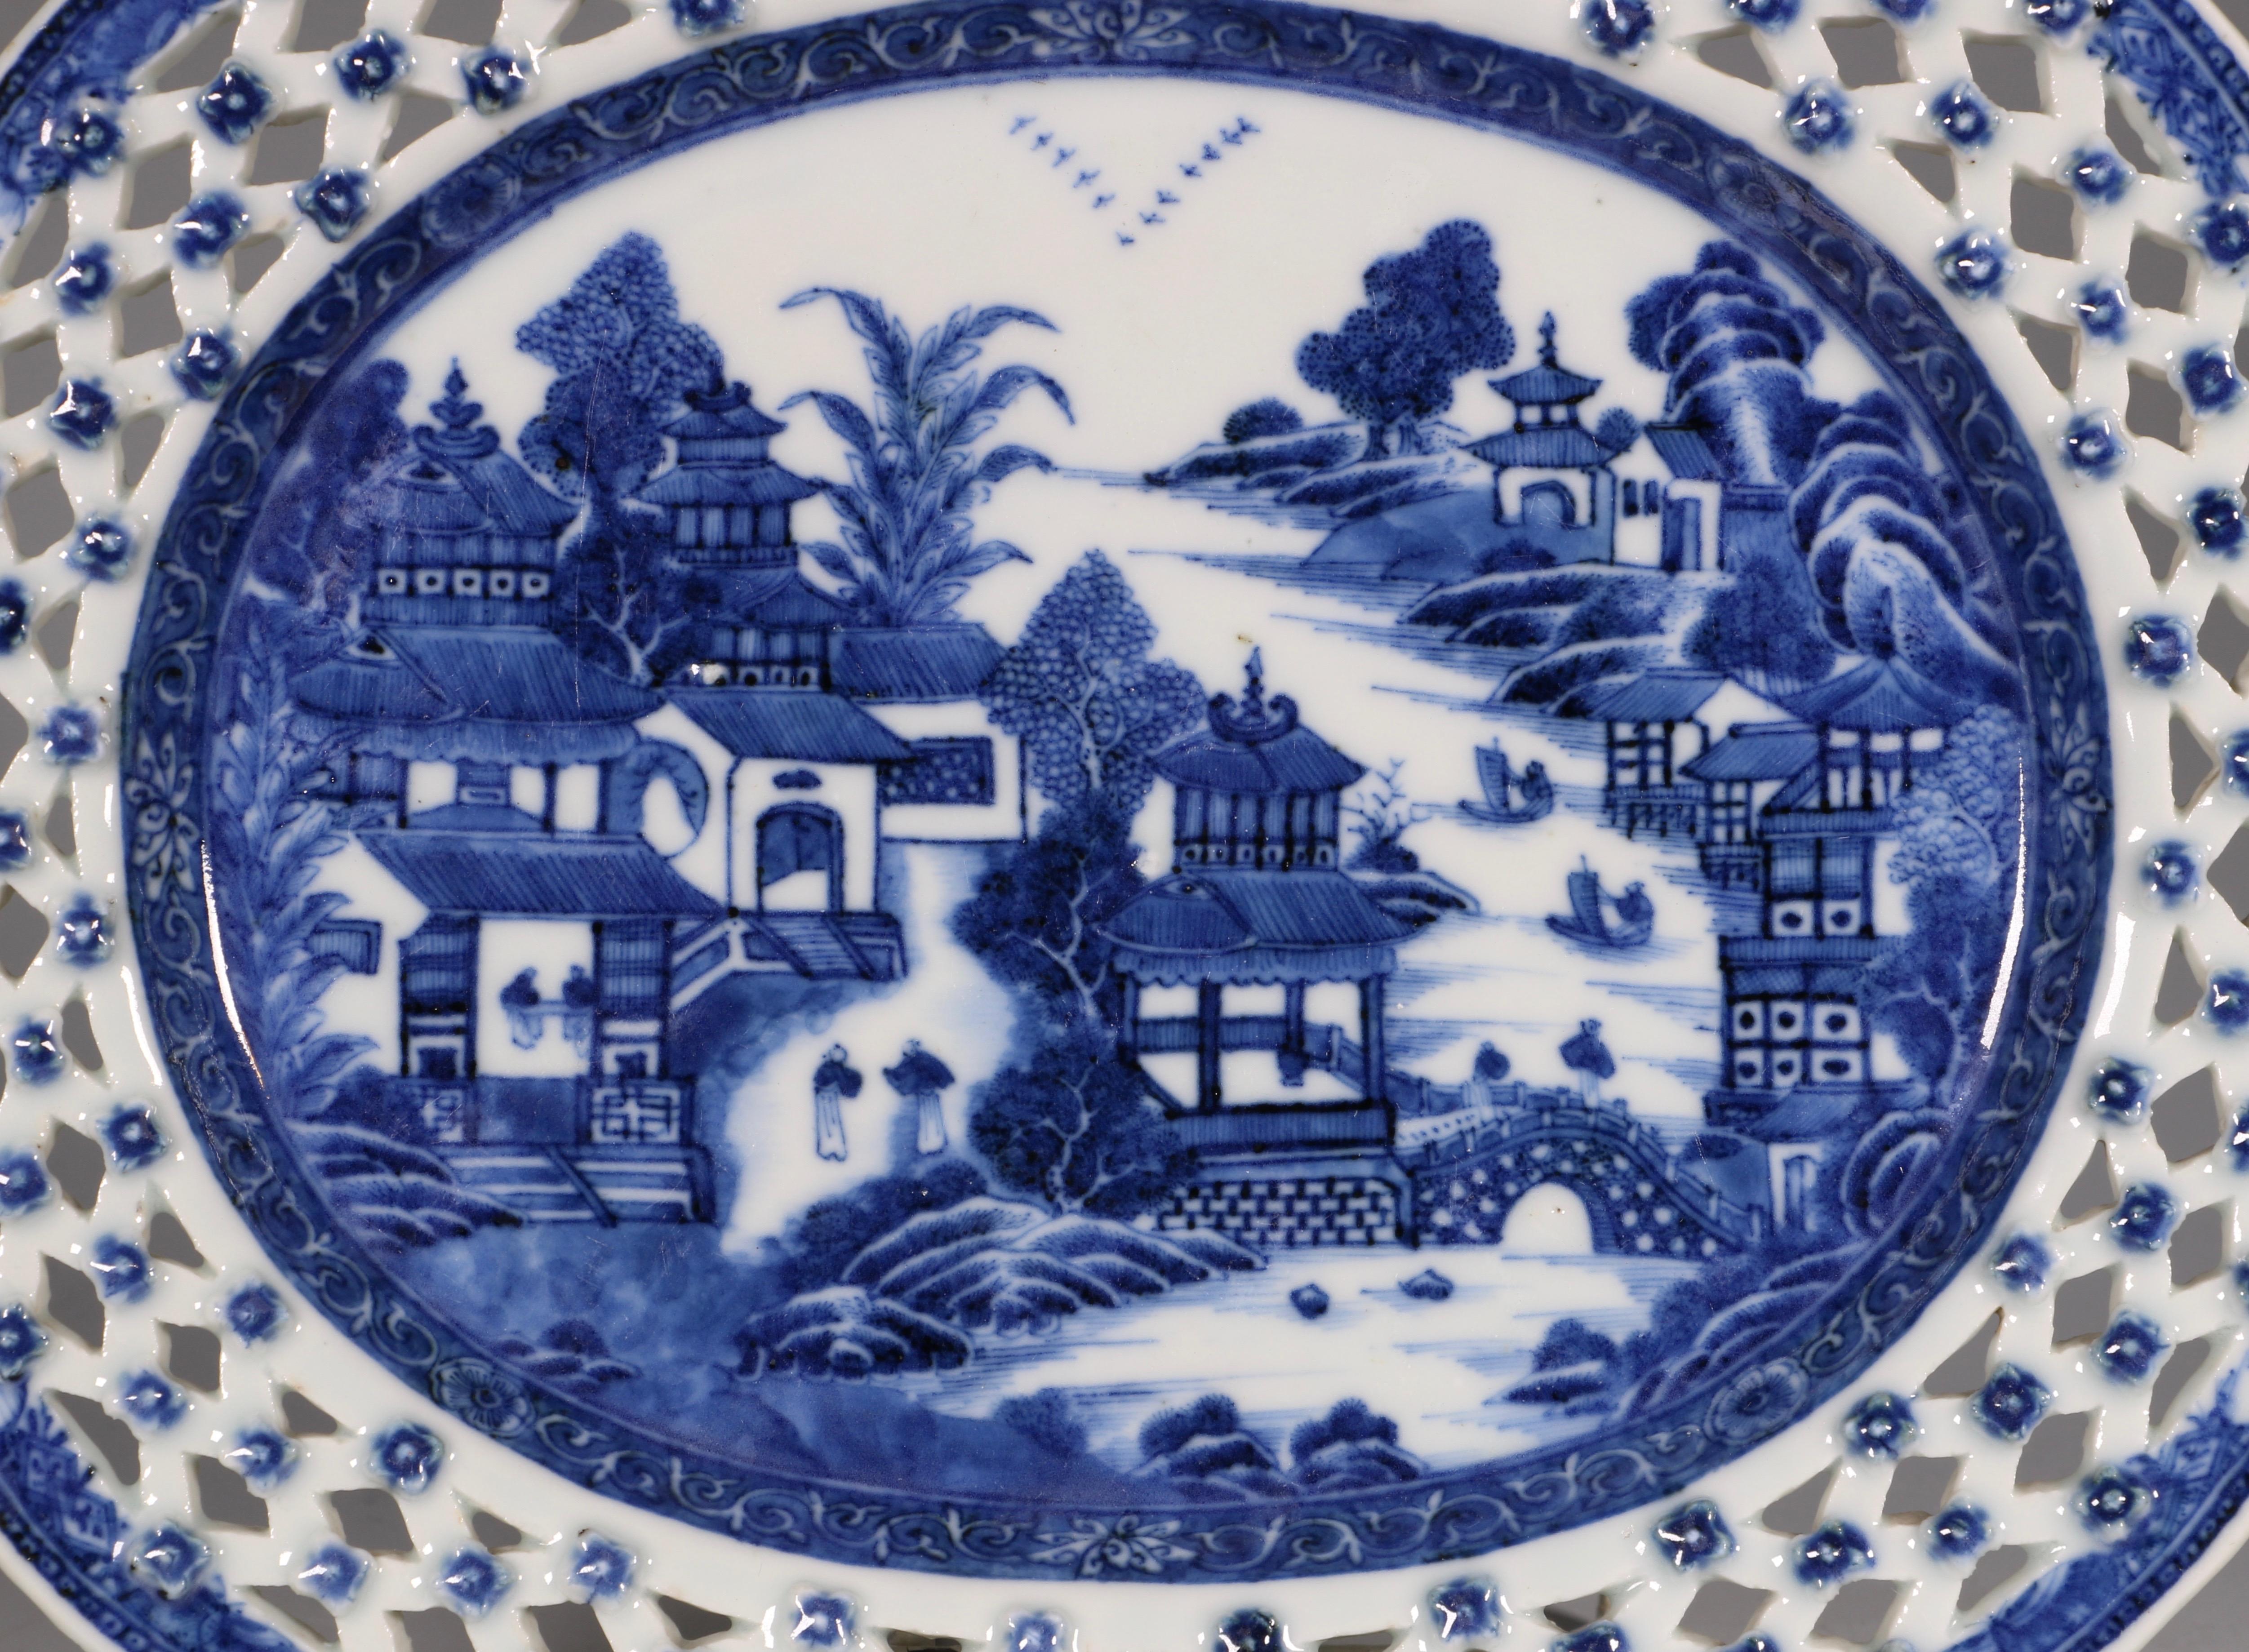 A lobed blue and white basketwork dish. Finely decorated with a Chinese scene of figures and pagodas in a lakeside setting.
The reticulated border with applied florets. This type of ‘basketwork’ with the applied florets originates from wares